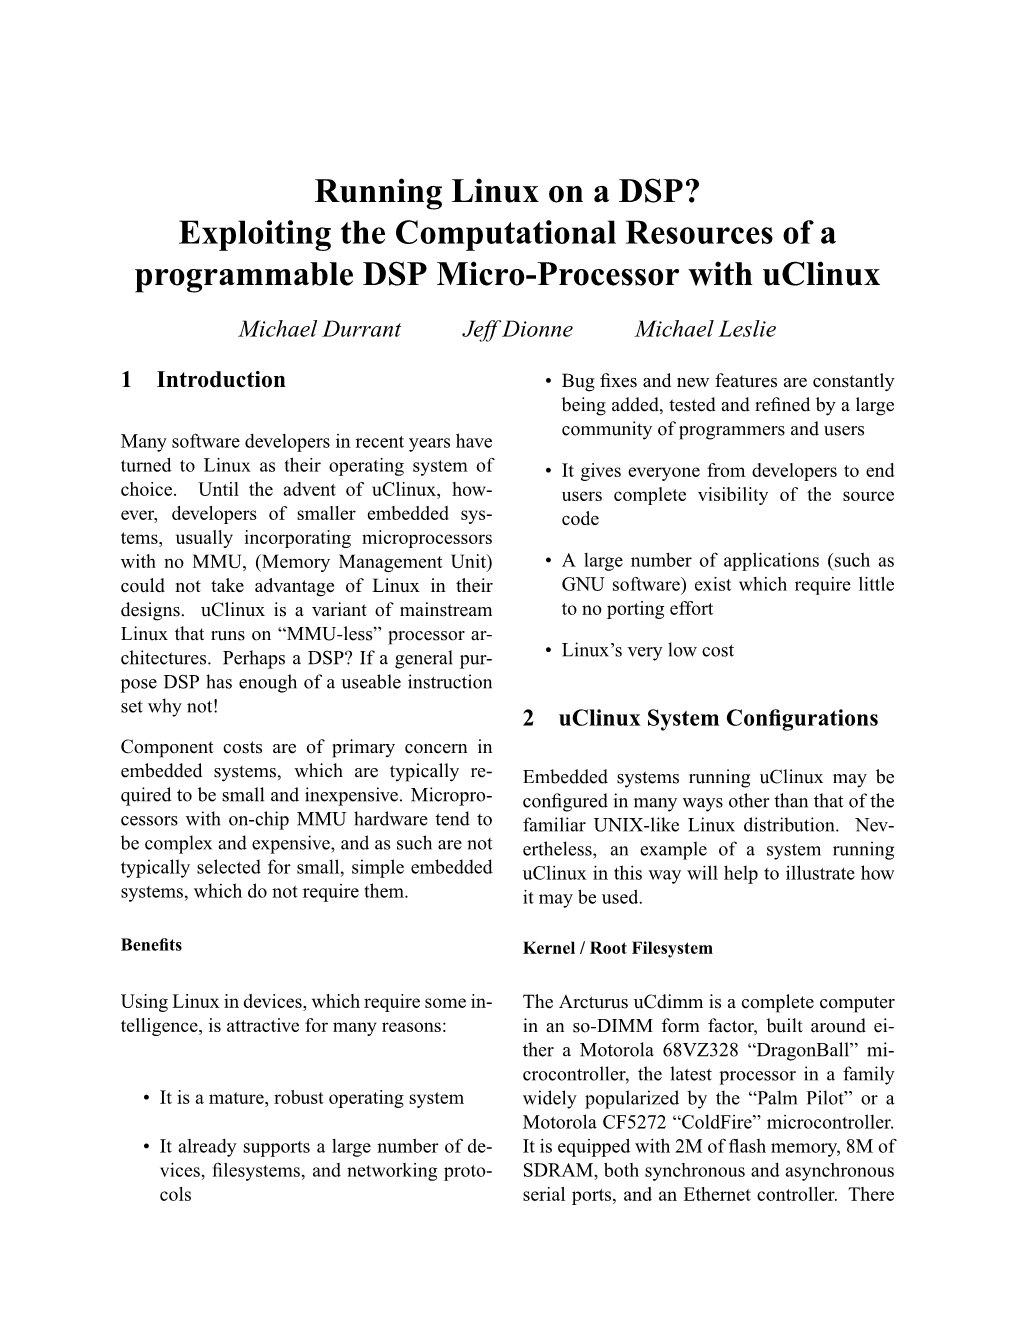 Running Linux on a DSP? Exploiting the Computational Resources of a Programmable DSP Micro-Processor with Uclinux